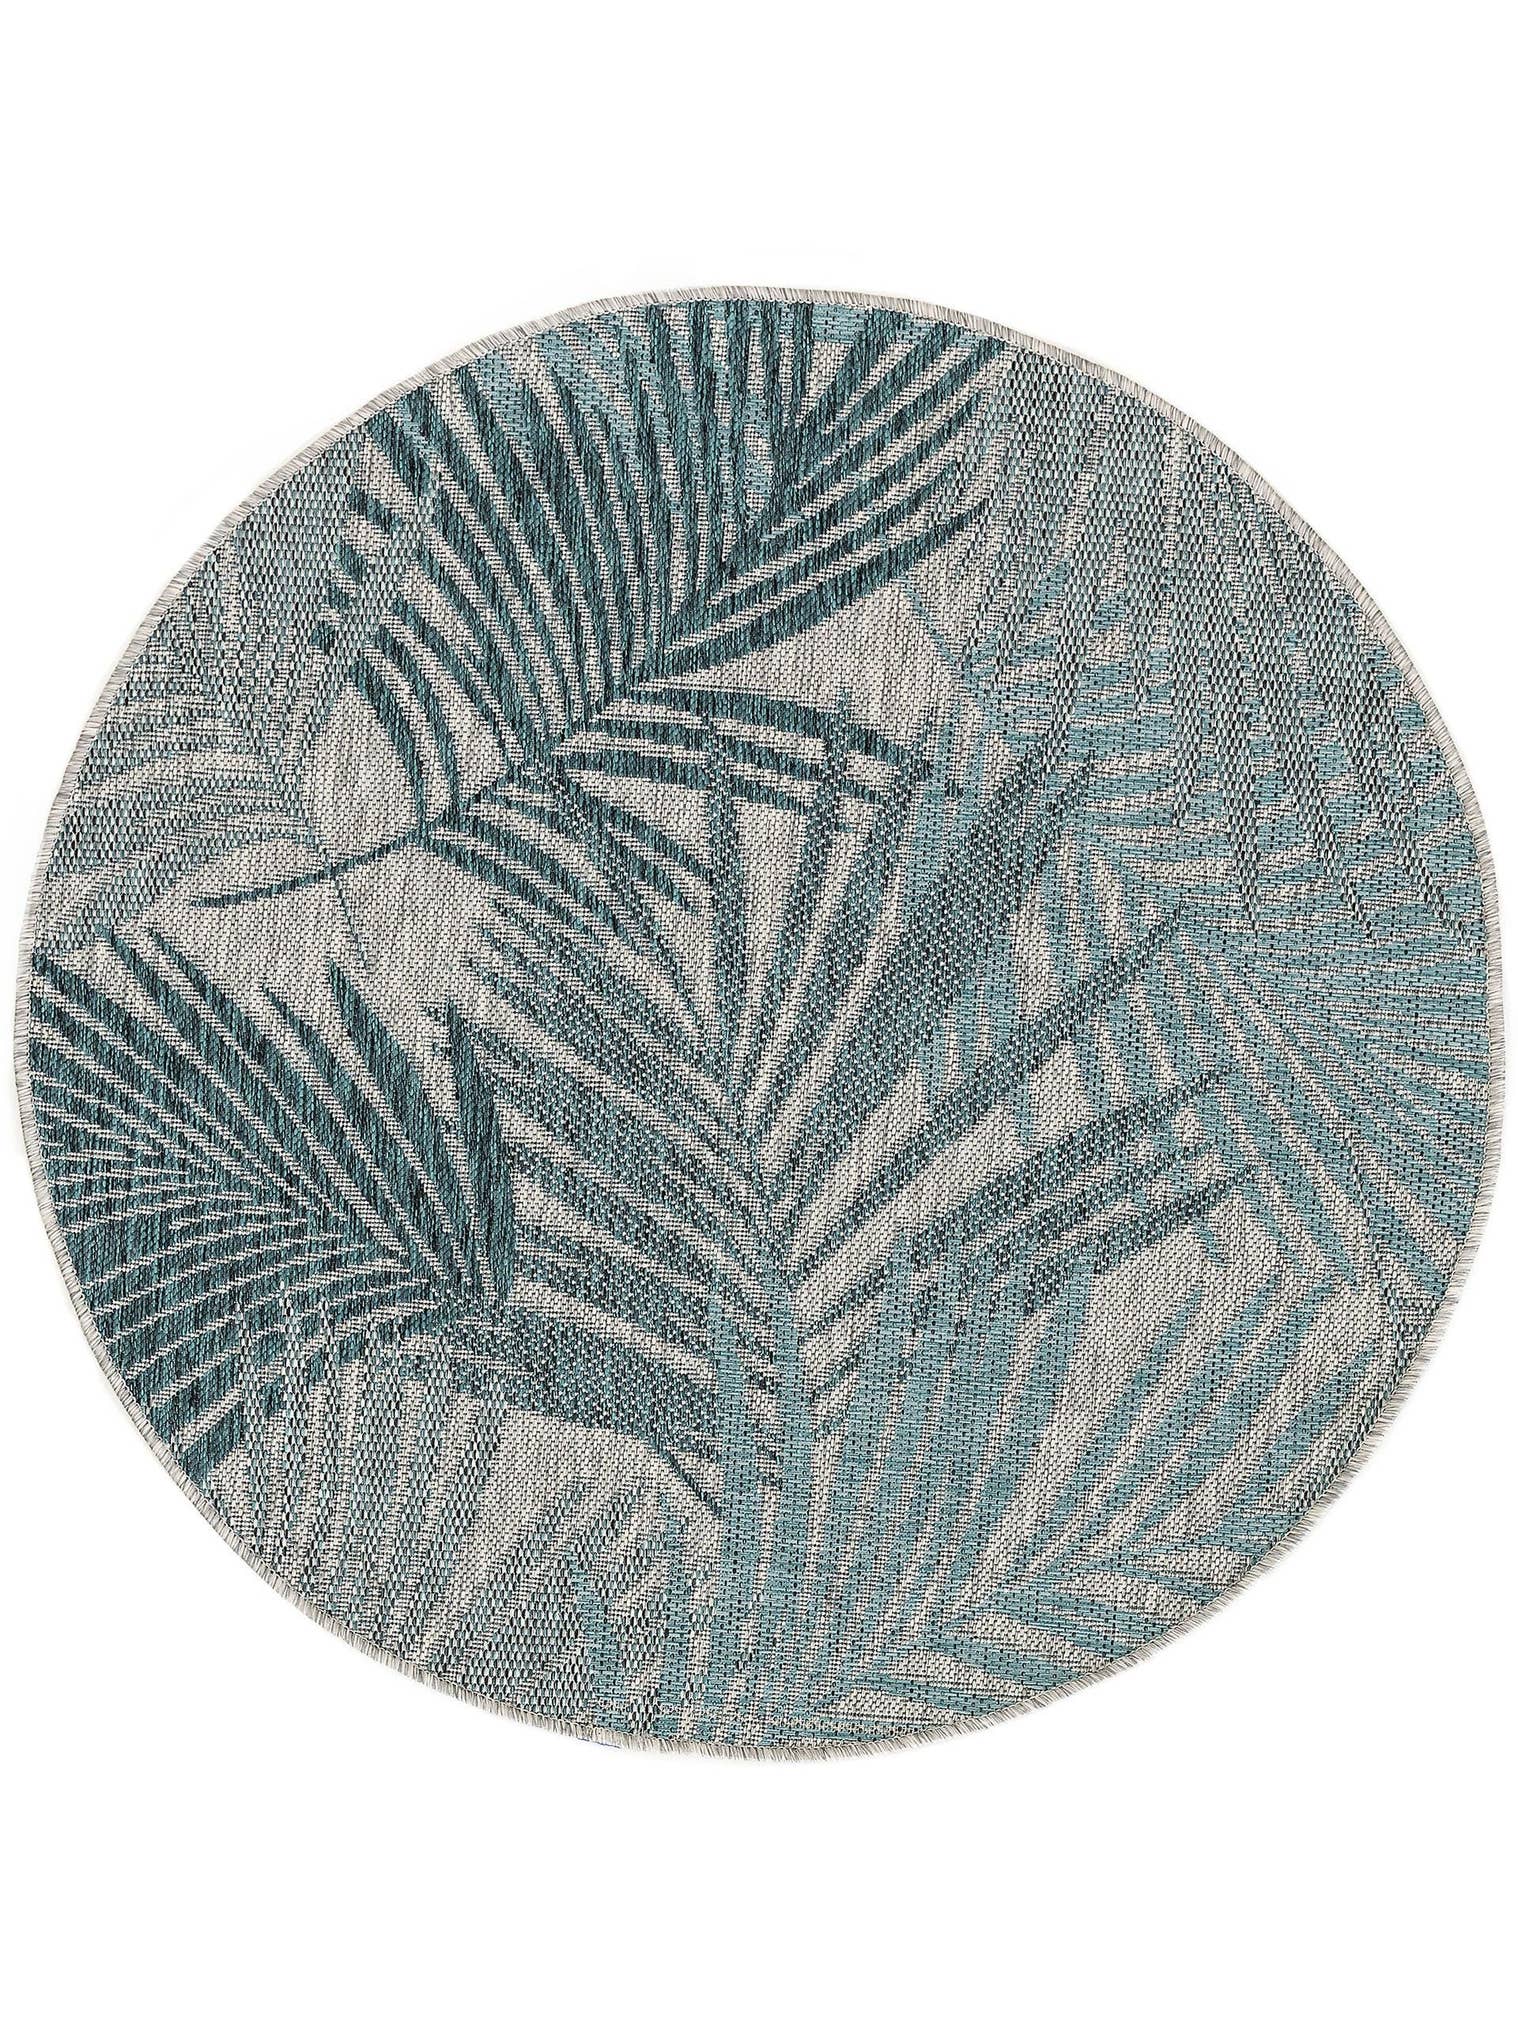 Rug made of 100% Polypropylene in Blue with a 1- 5 mm high pile by benuta Nest